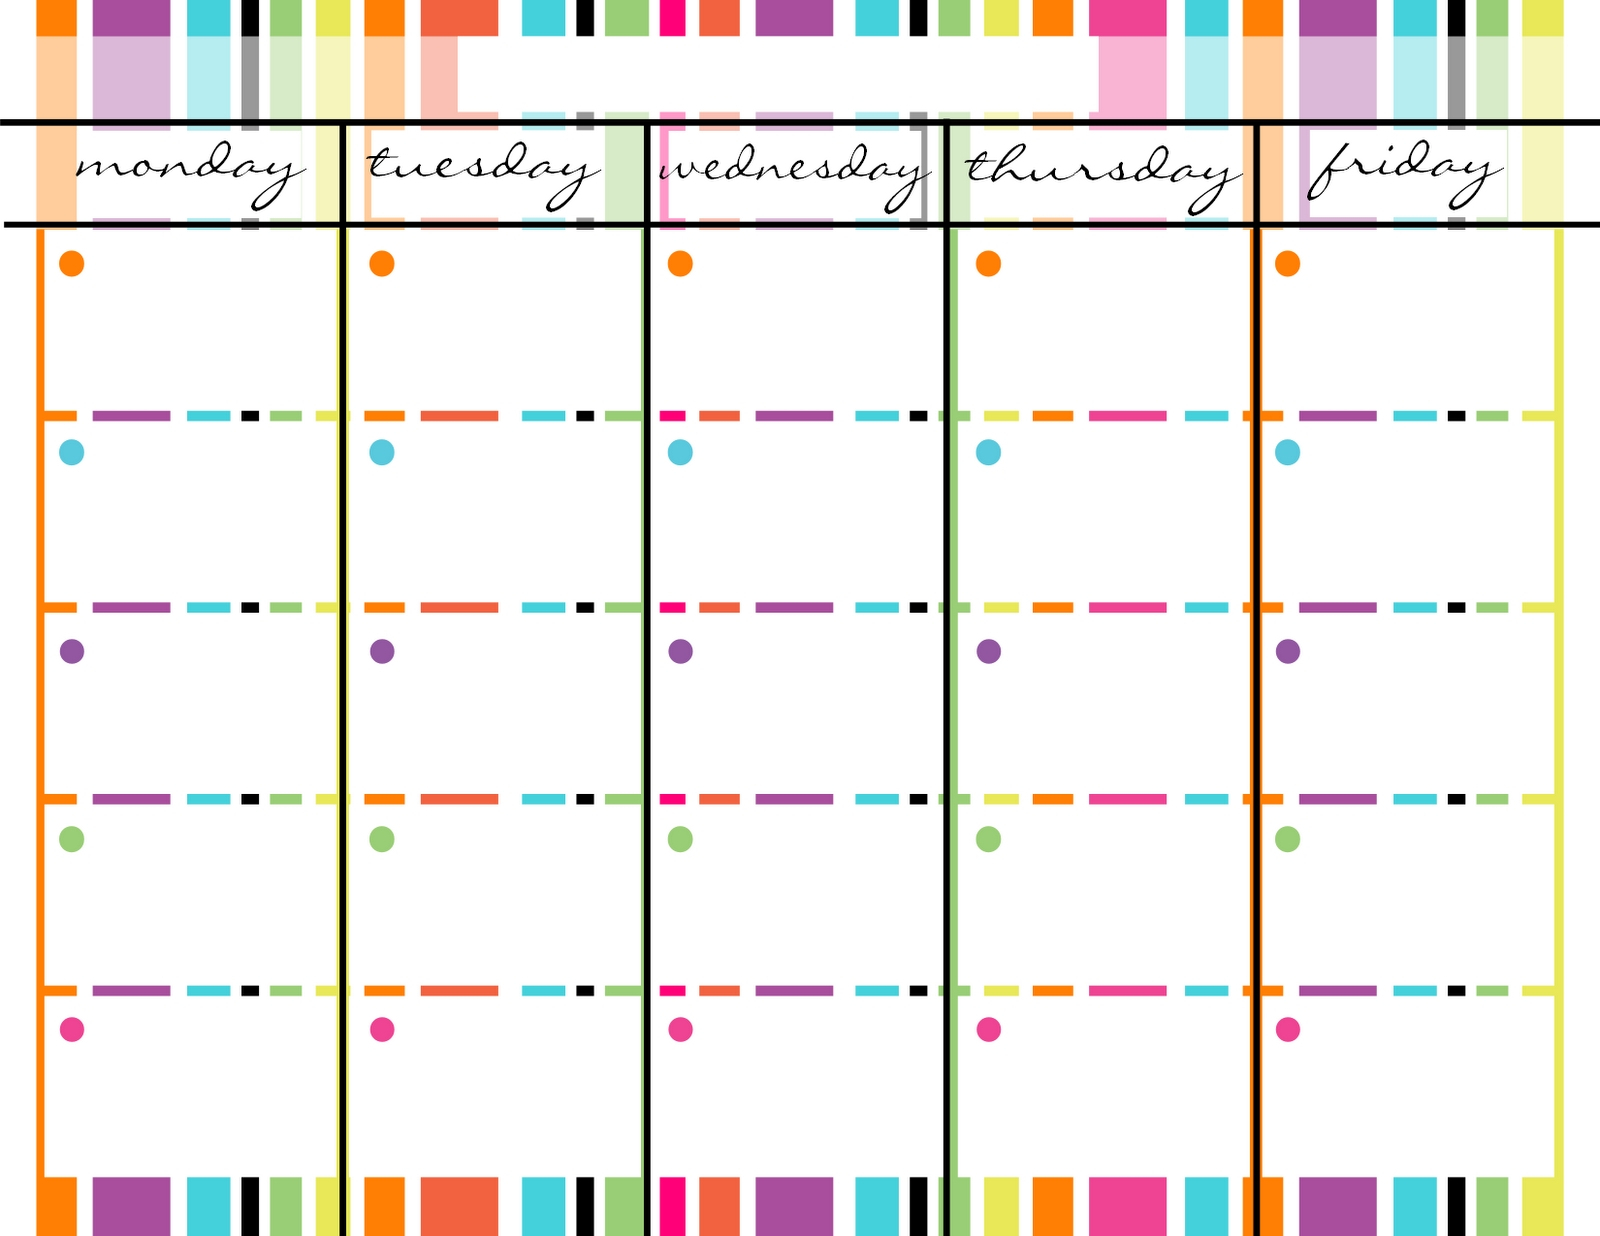 Sundat To Saturday Printable Monthly Blank Calendar Schedule To Print Sunday To Saturday